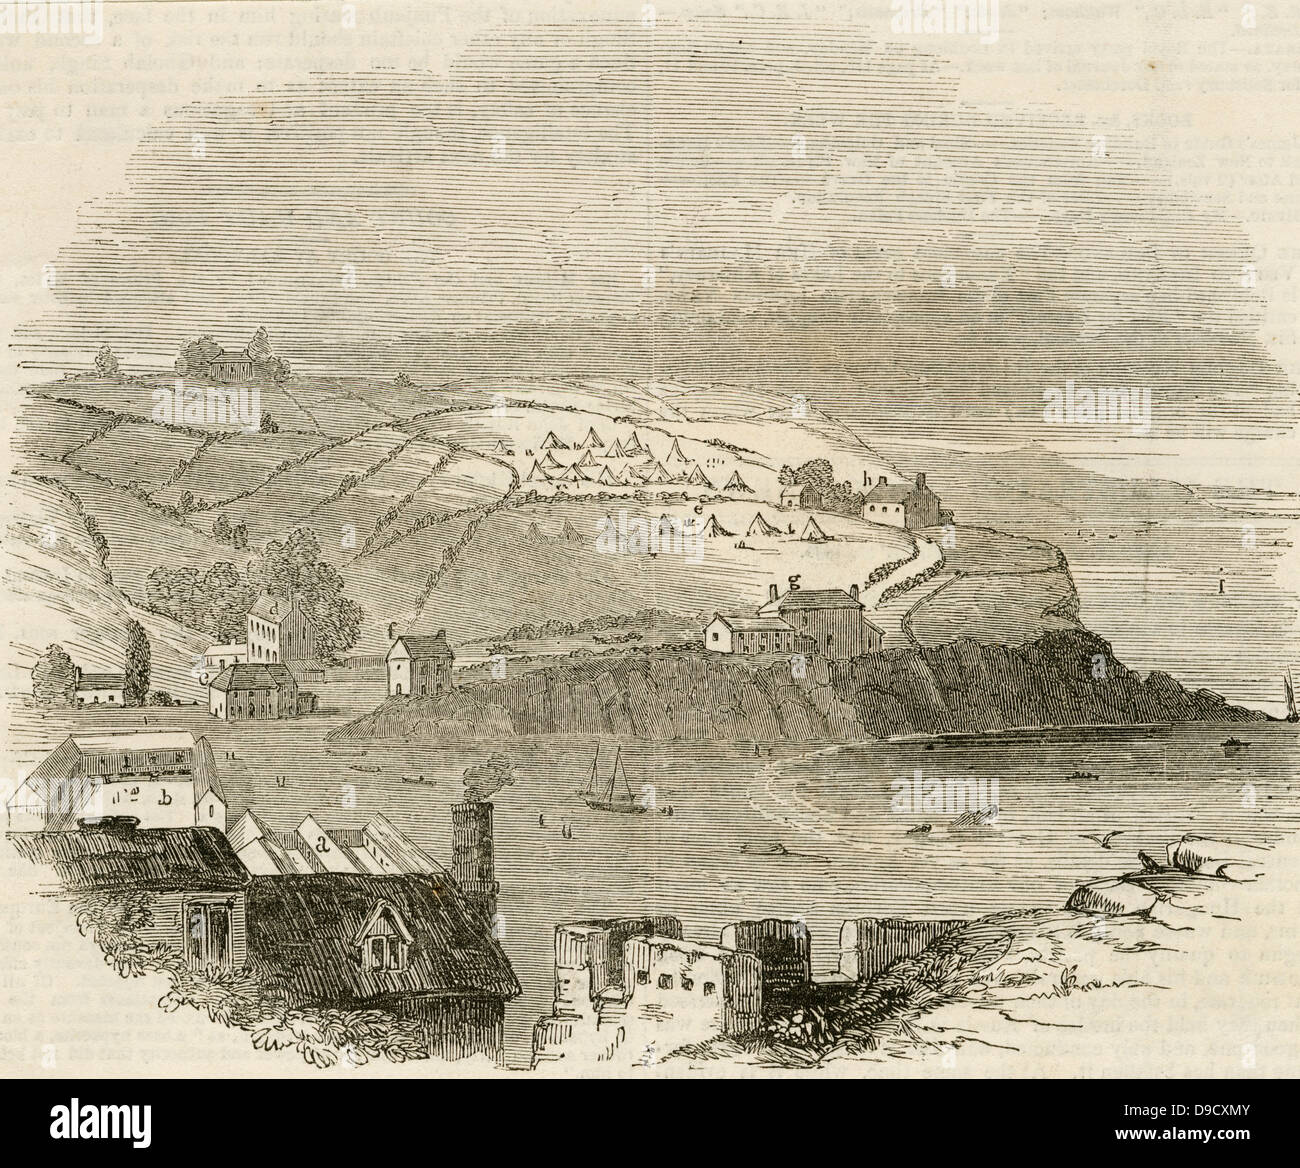 Mevagissy, Cornwall, England, during the Cholera epidemic of 1849, showing the Board of Health tents in the background.  Woodcut, August 1849.t Stock Photo